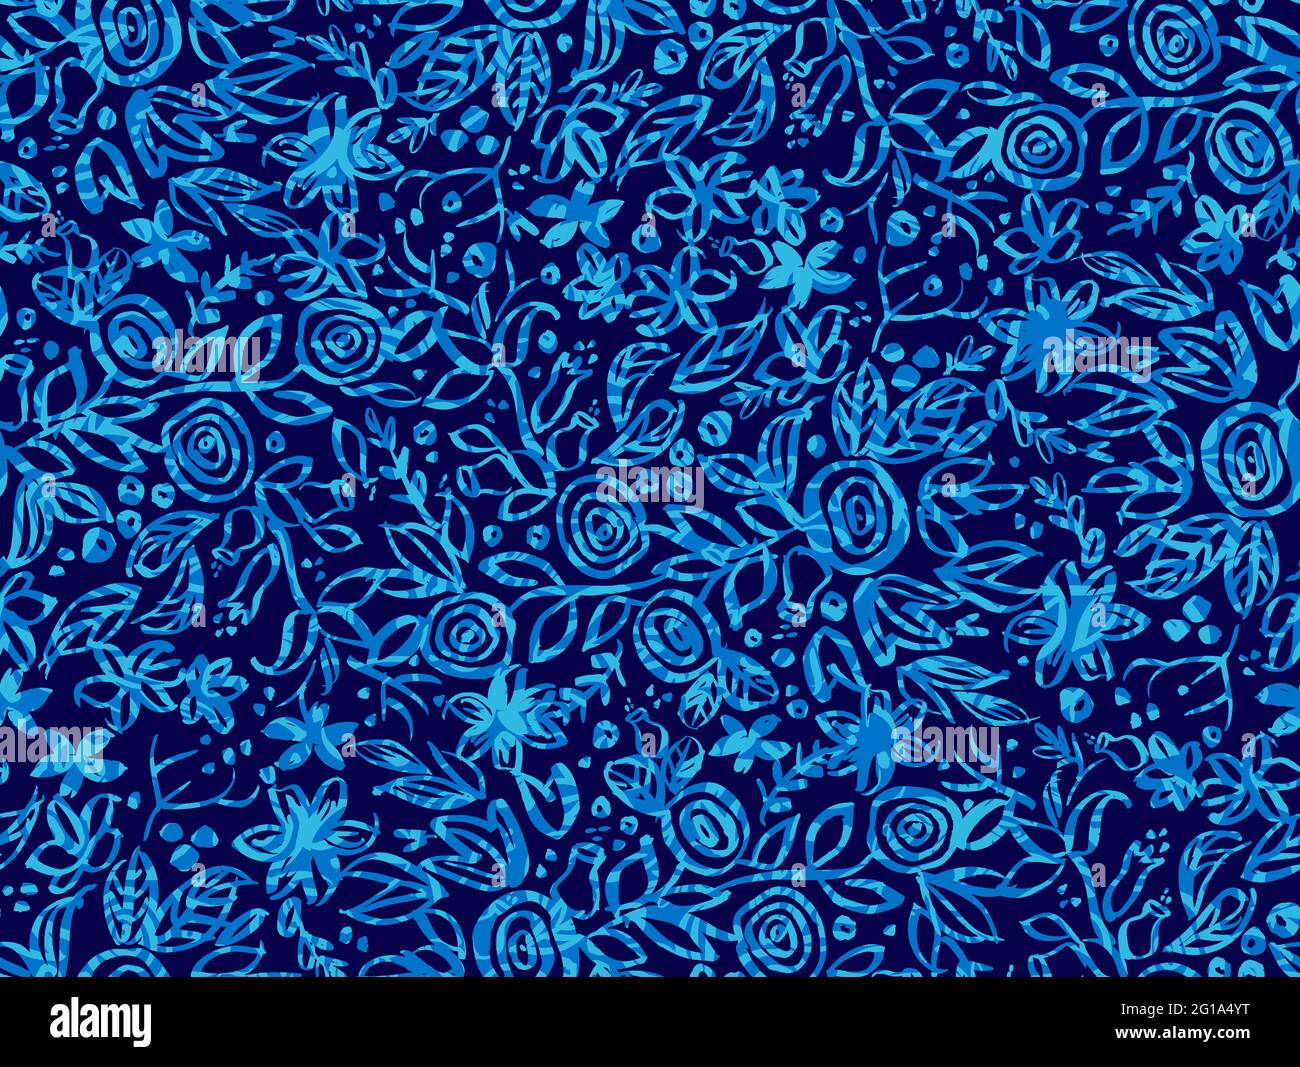 Seamless pattern with Floral motifs in blue tones Stock Photo